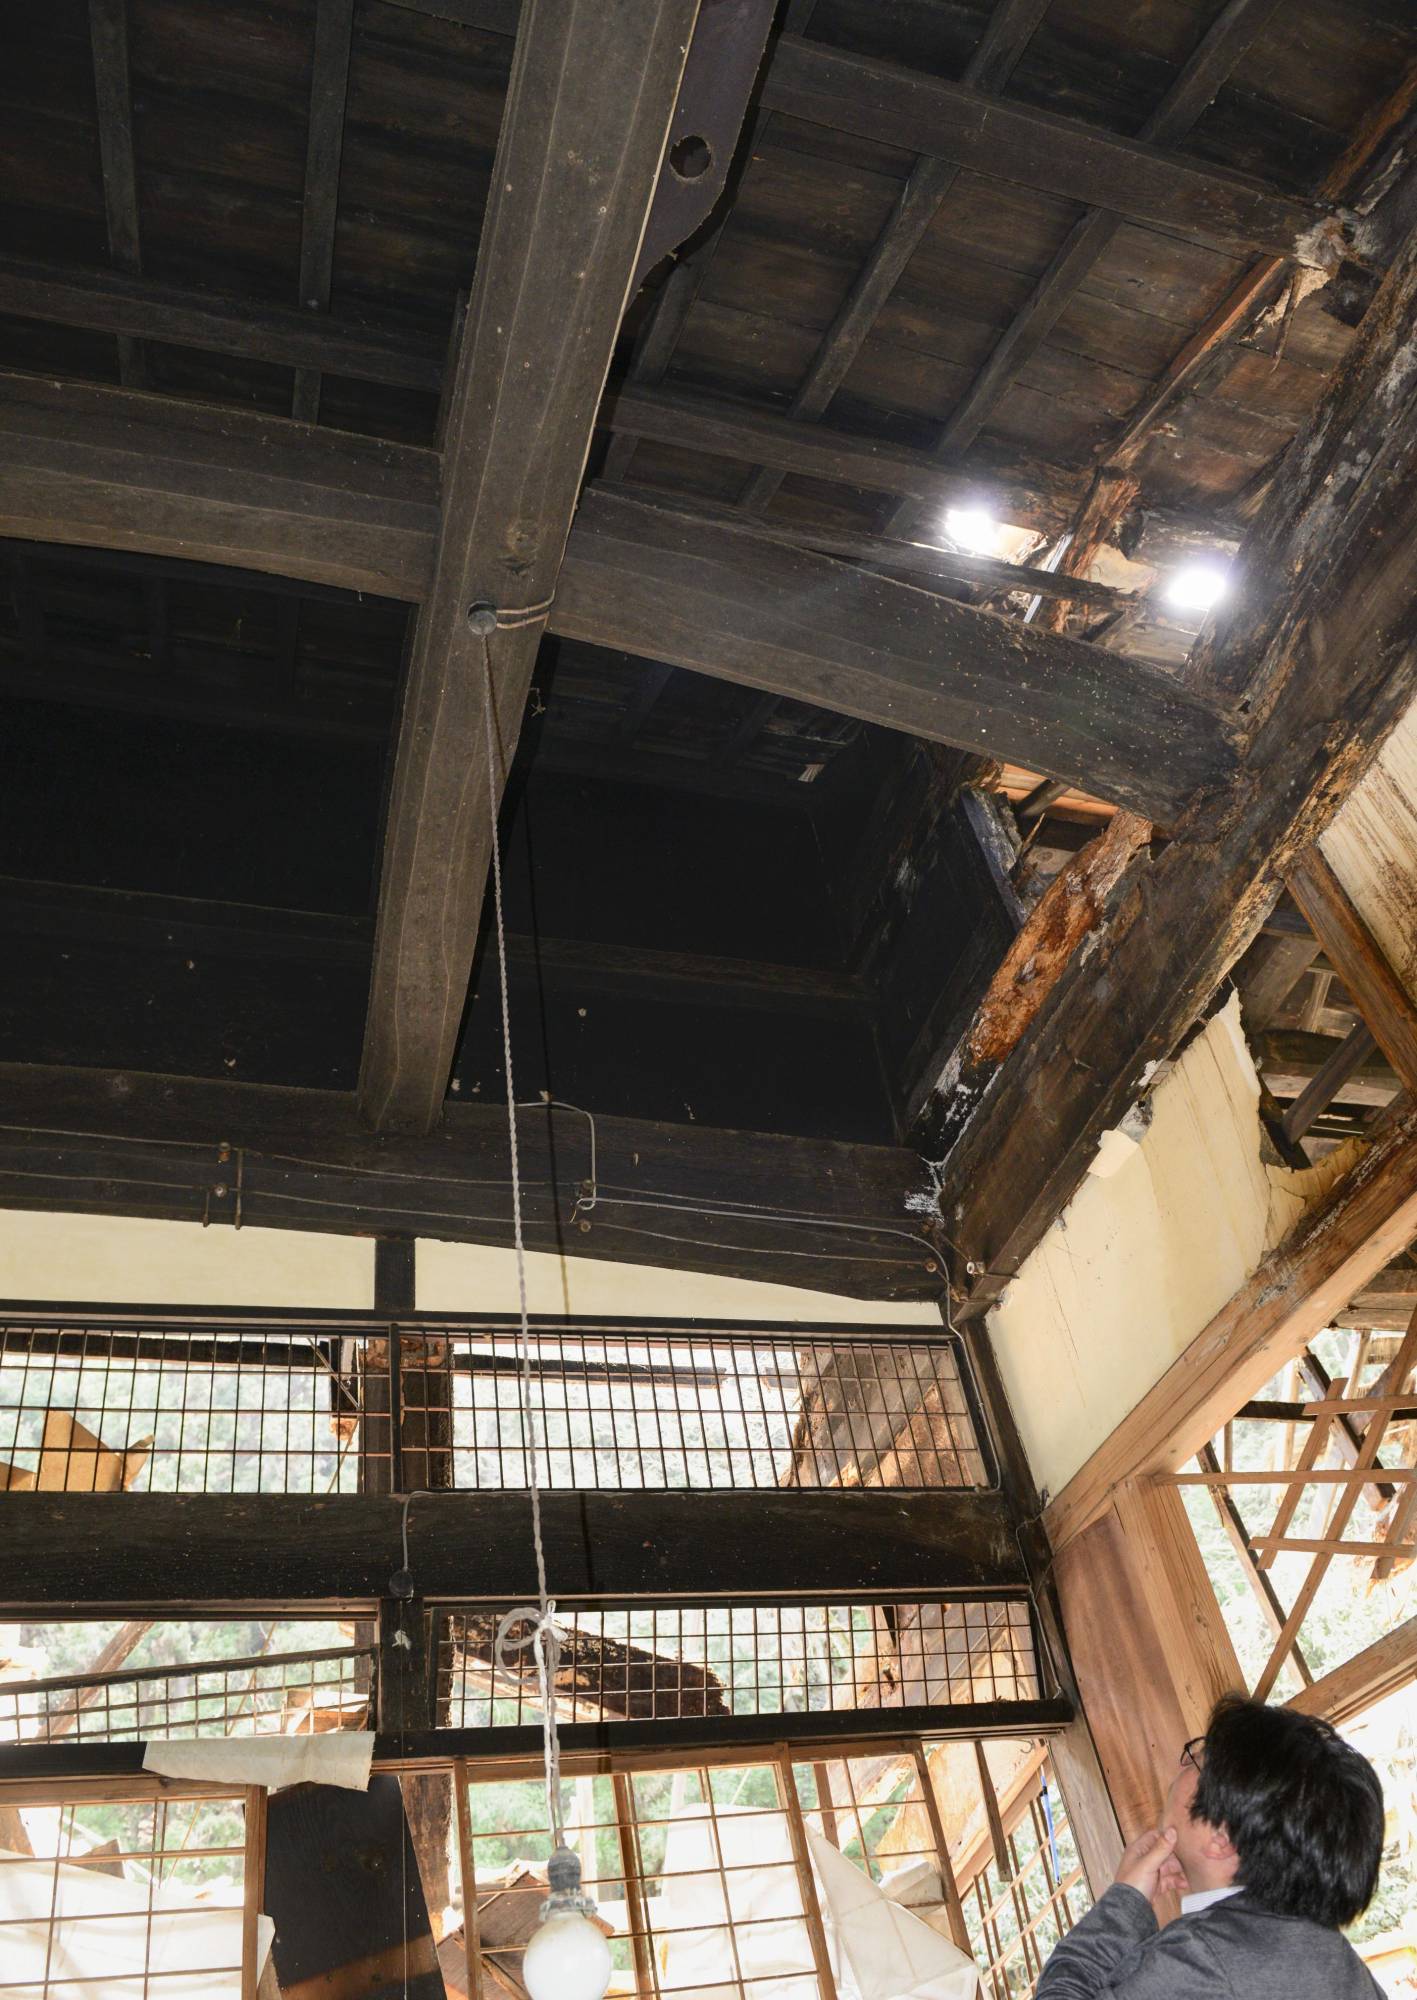 Sturdy pine beams are shown supporting the ceiling of a vacant house in Shimane Prefecture on March 30. The house itself is otherwise in a state of ruin. | KYODO